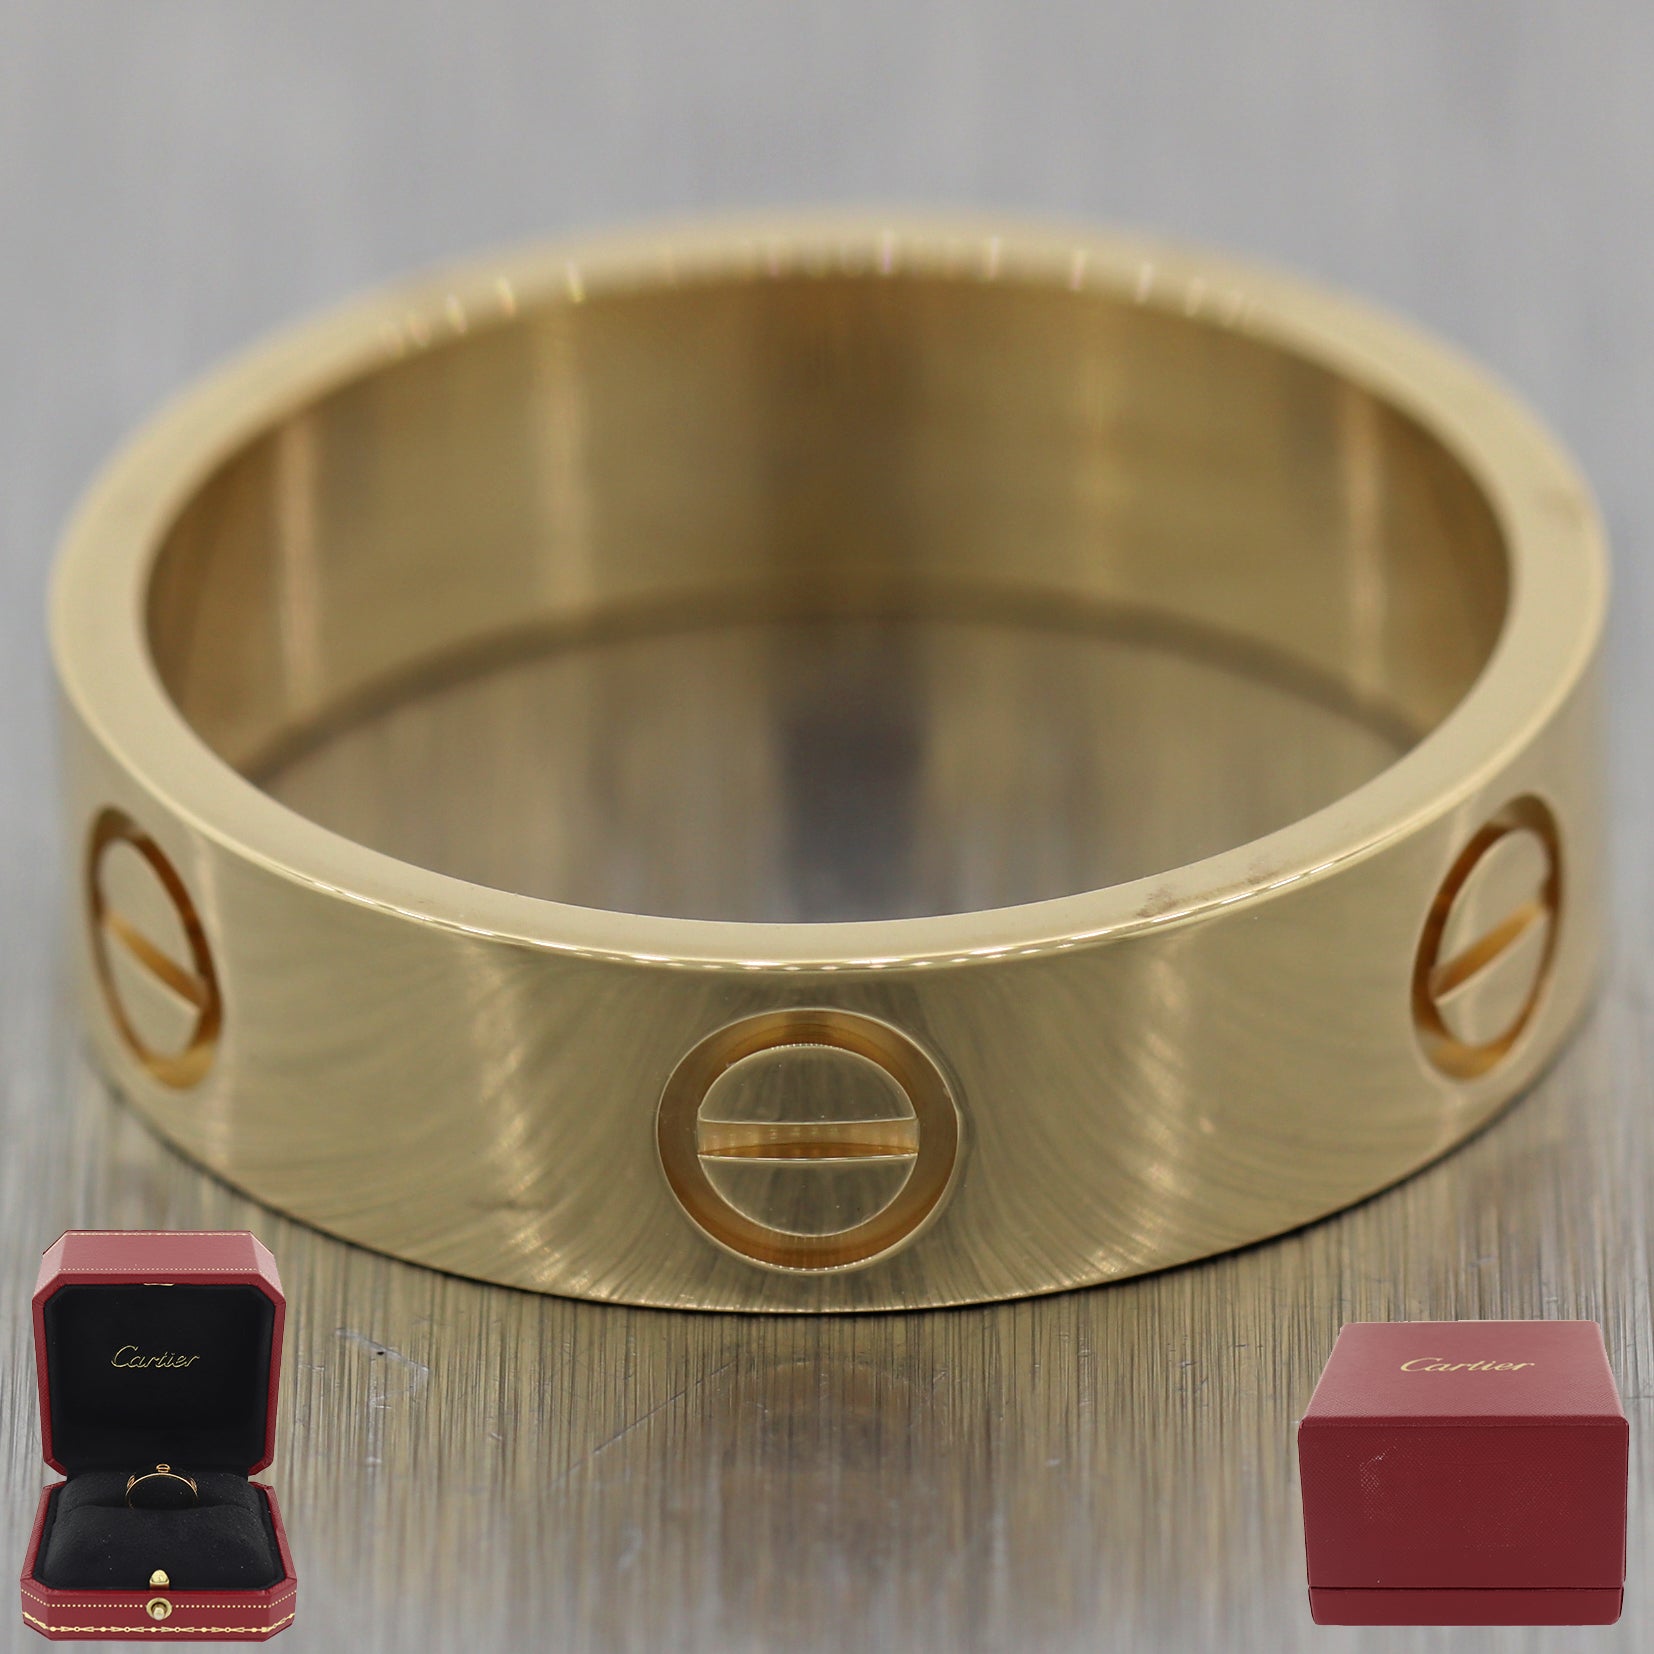 cartier ring 58